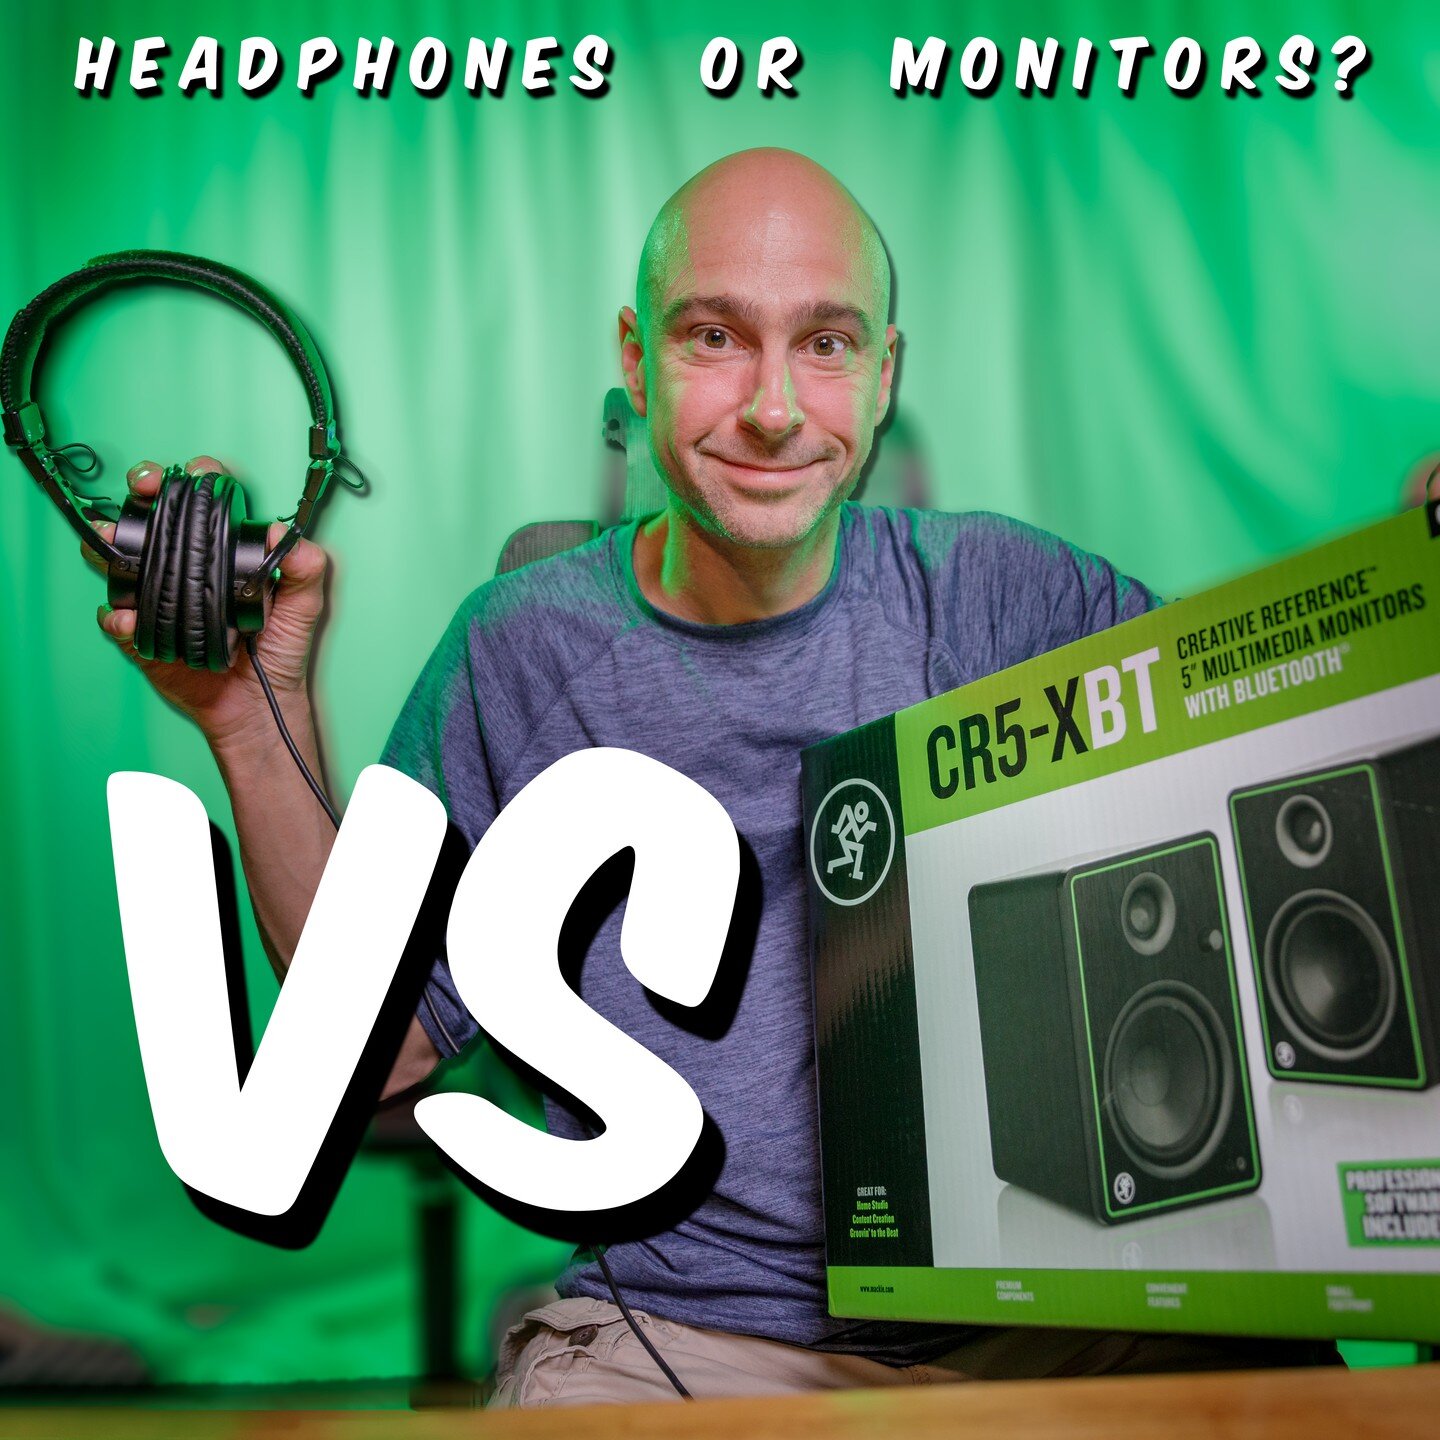 Headphones VS Studio Monitor speakers - which is better? I don't know, but I'm going to find out! 
Thank you to @mackiegear for sending out the CR5-XBT monitors! I'll be sure to report back to you all with my thoughts on editing audio on monitors vs 